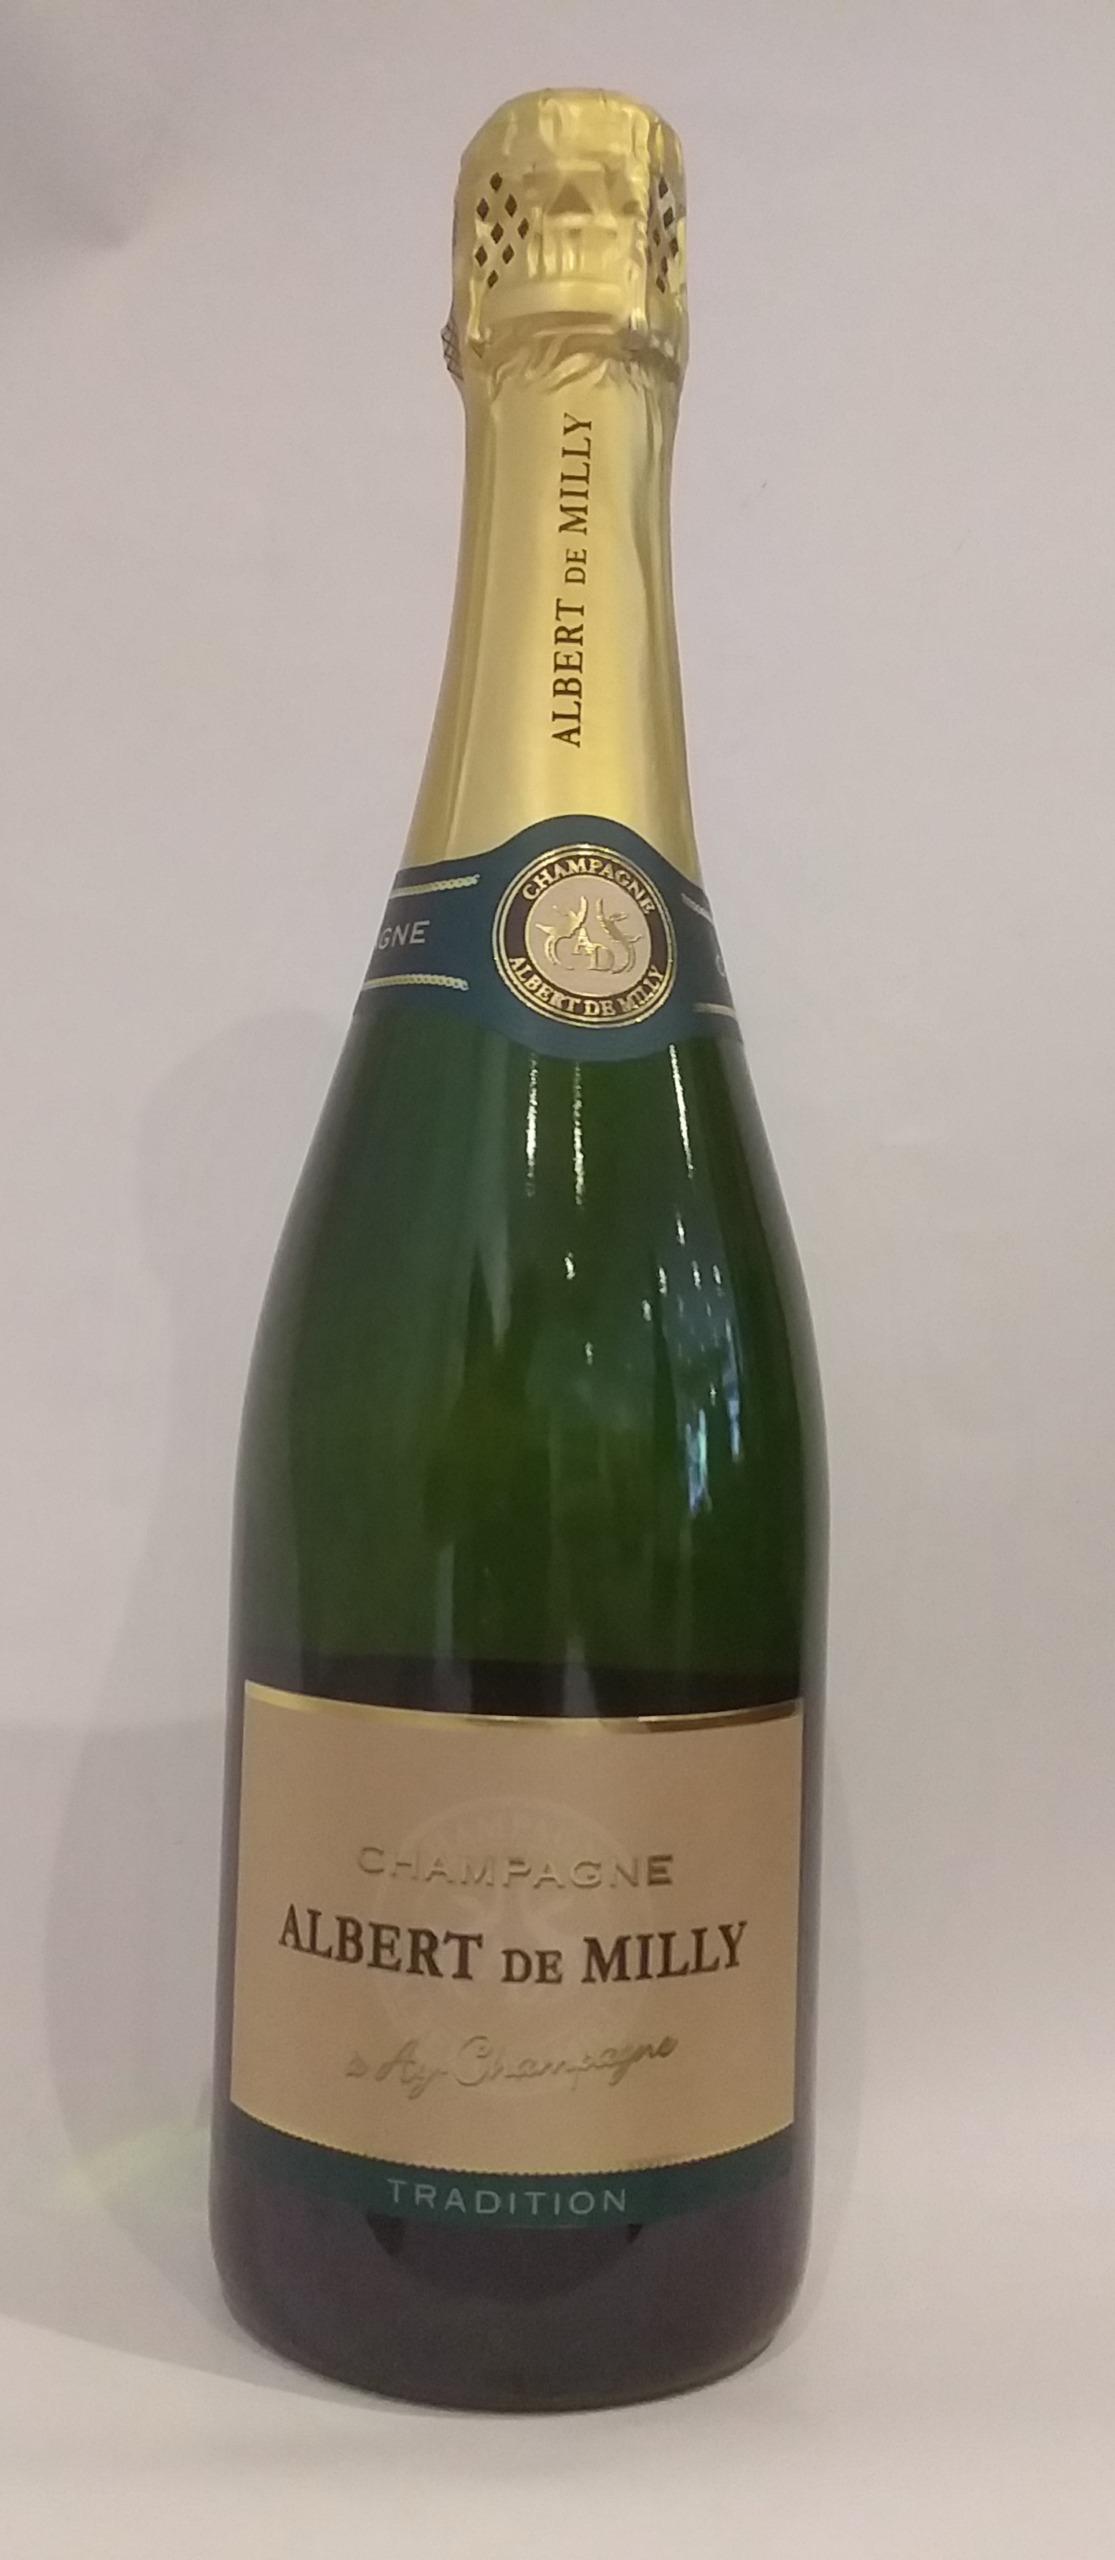 Champagne brut - Domaine Albert de Milly - Tradition